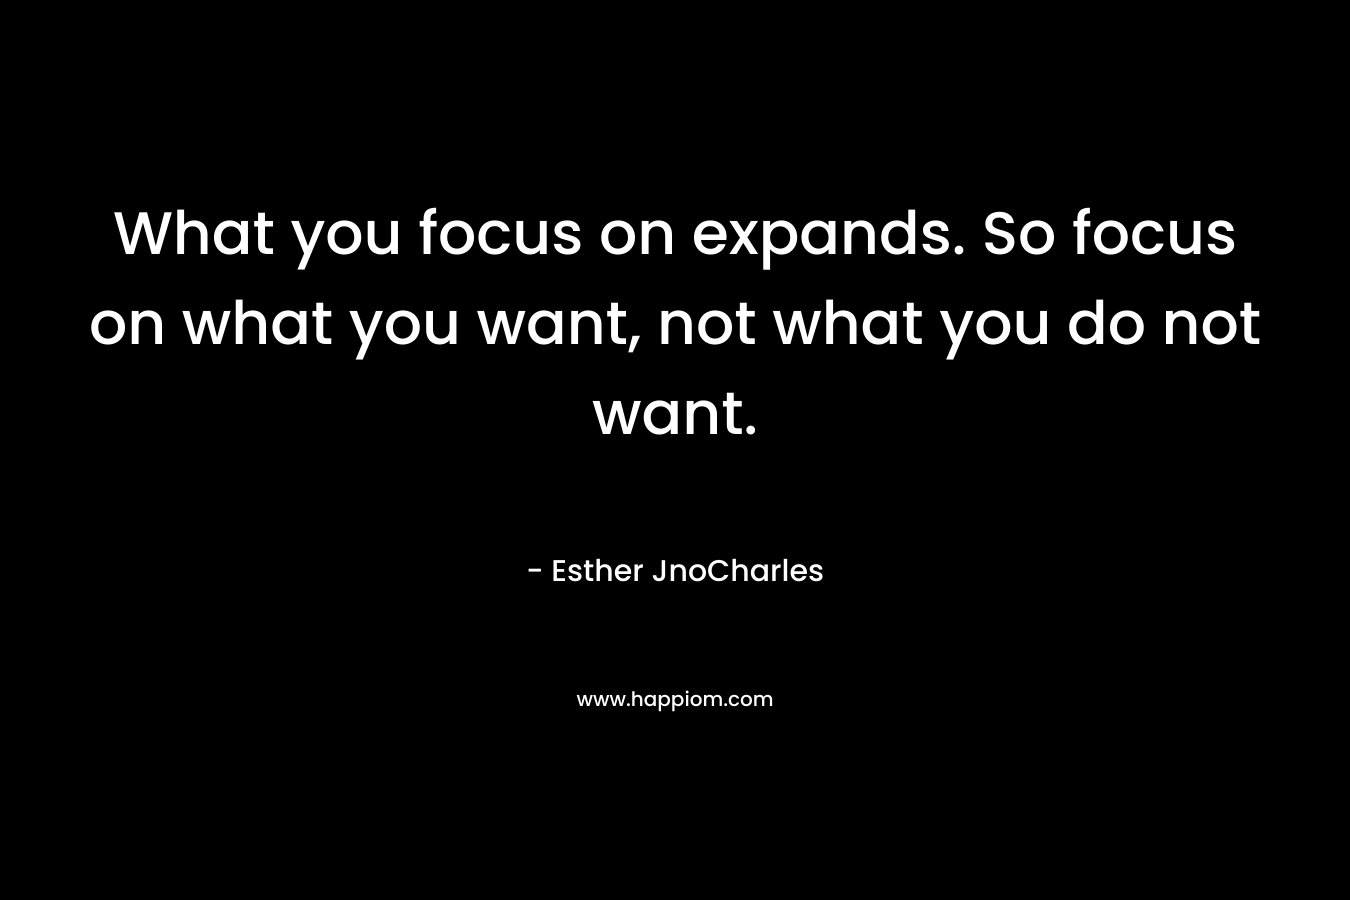 What you focus on expands. So focus on what you want, not what you do not want.